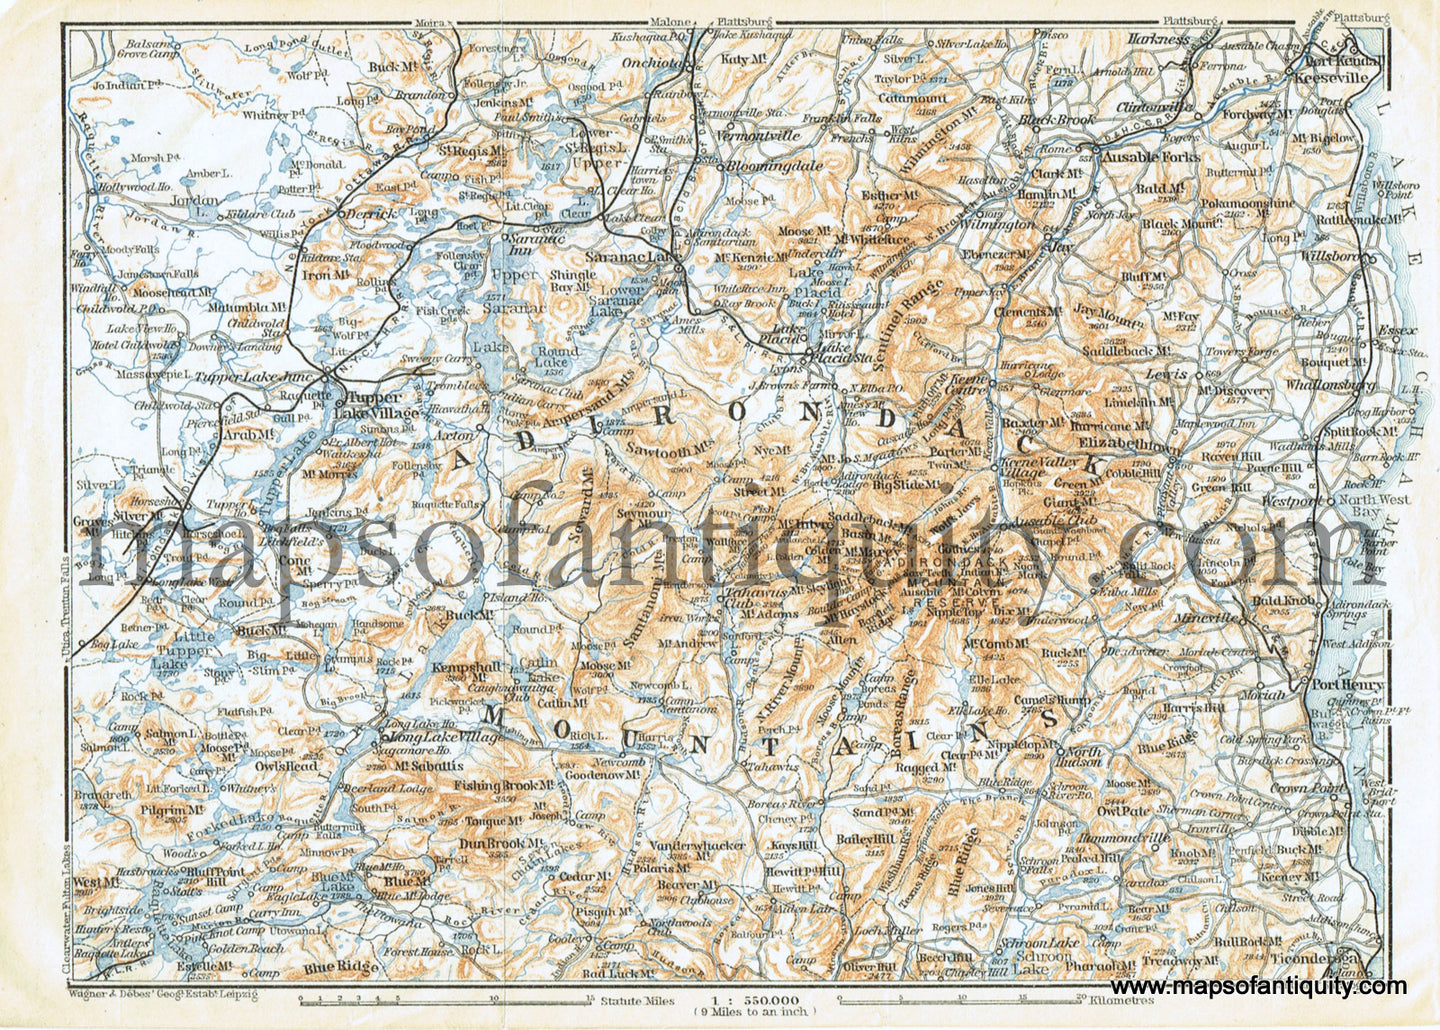 Antique-Printed-Color-Map-Adirondack-Mountains-******-United-States-Northeast-1909-Baedeker-Maps-Of-Antiquity